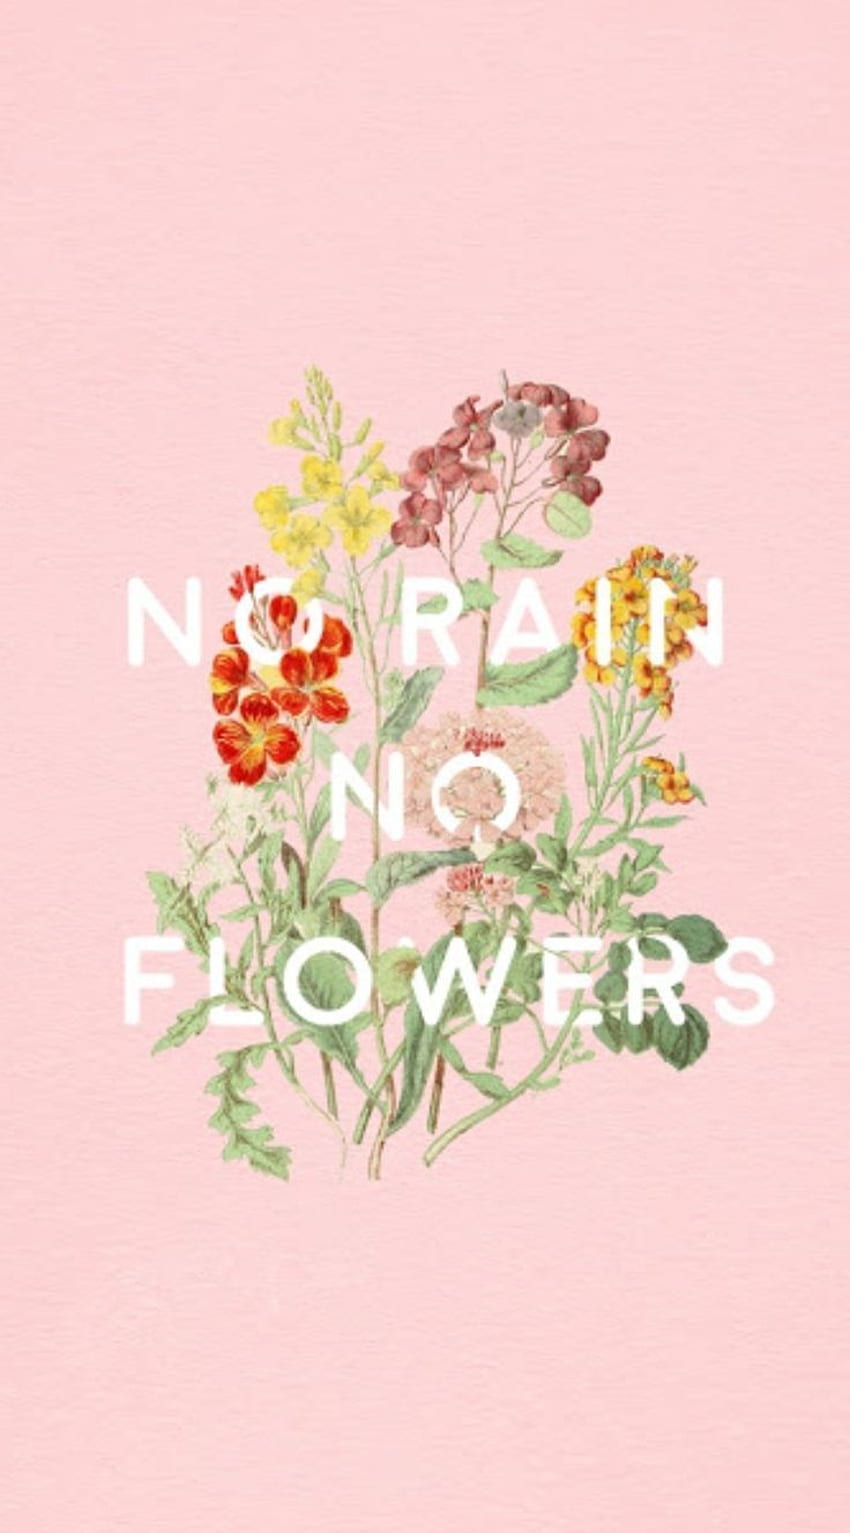 Best Motivational Quotes : no rain no flowers. Leading Quotes Magazine, find best quotes collection with inspirational, motivational and wise quotations on what is best and being the best HD phone wallpaper